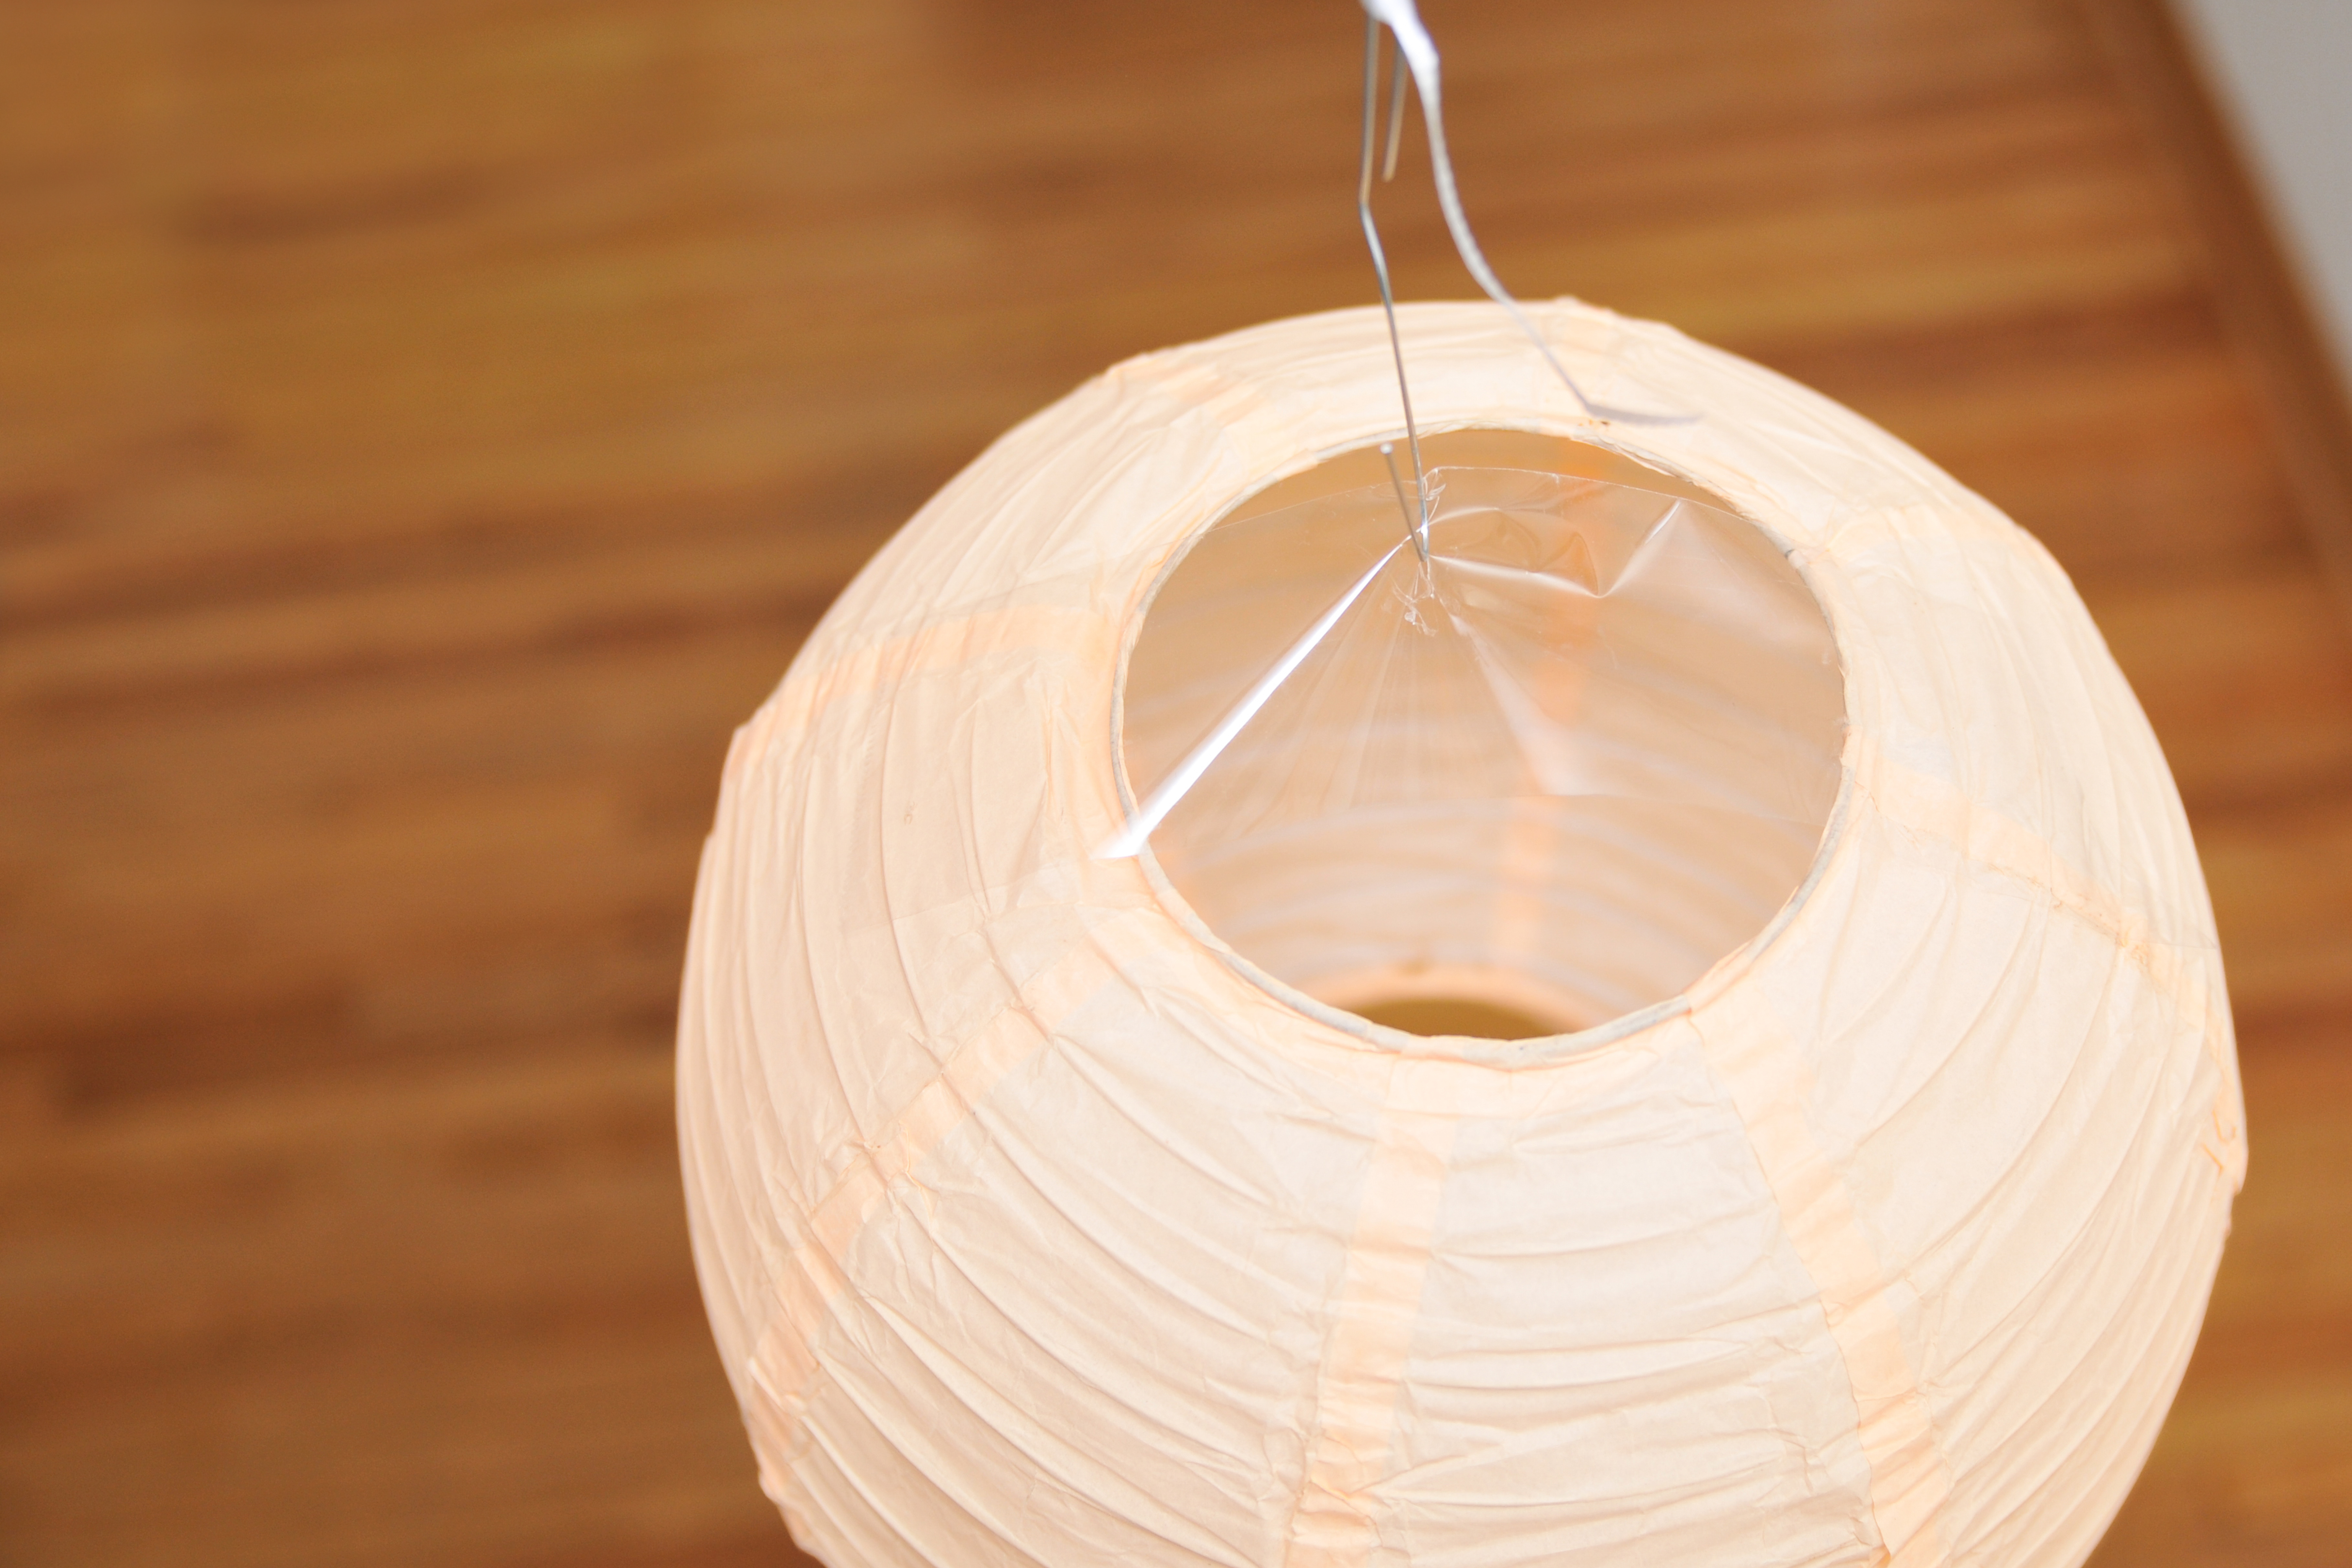 How to Make a Night Lamp out of Paper - DIY Paper Lamp (Pendant Light) 